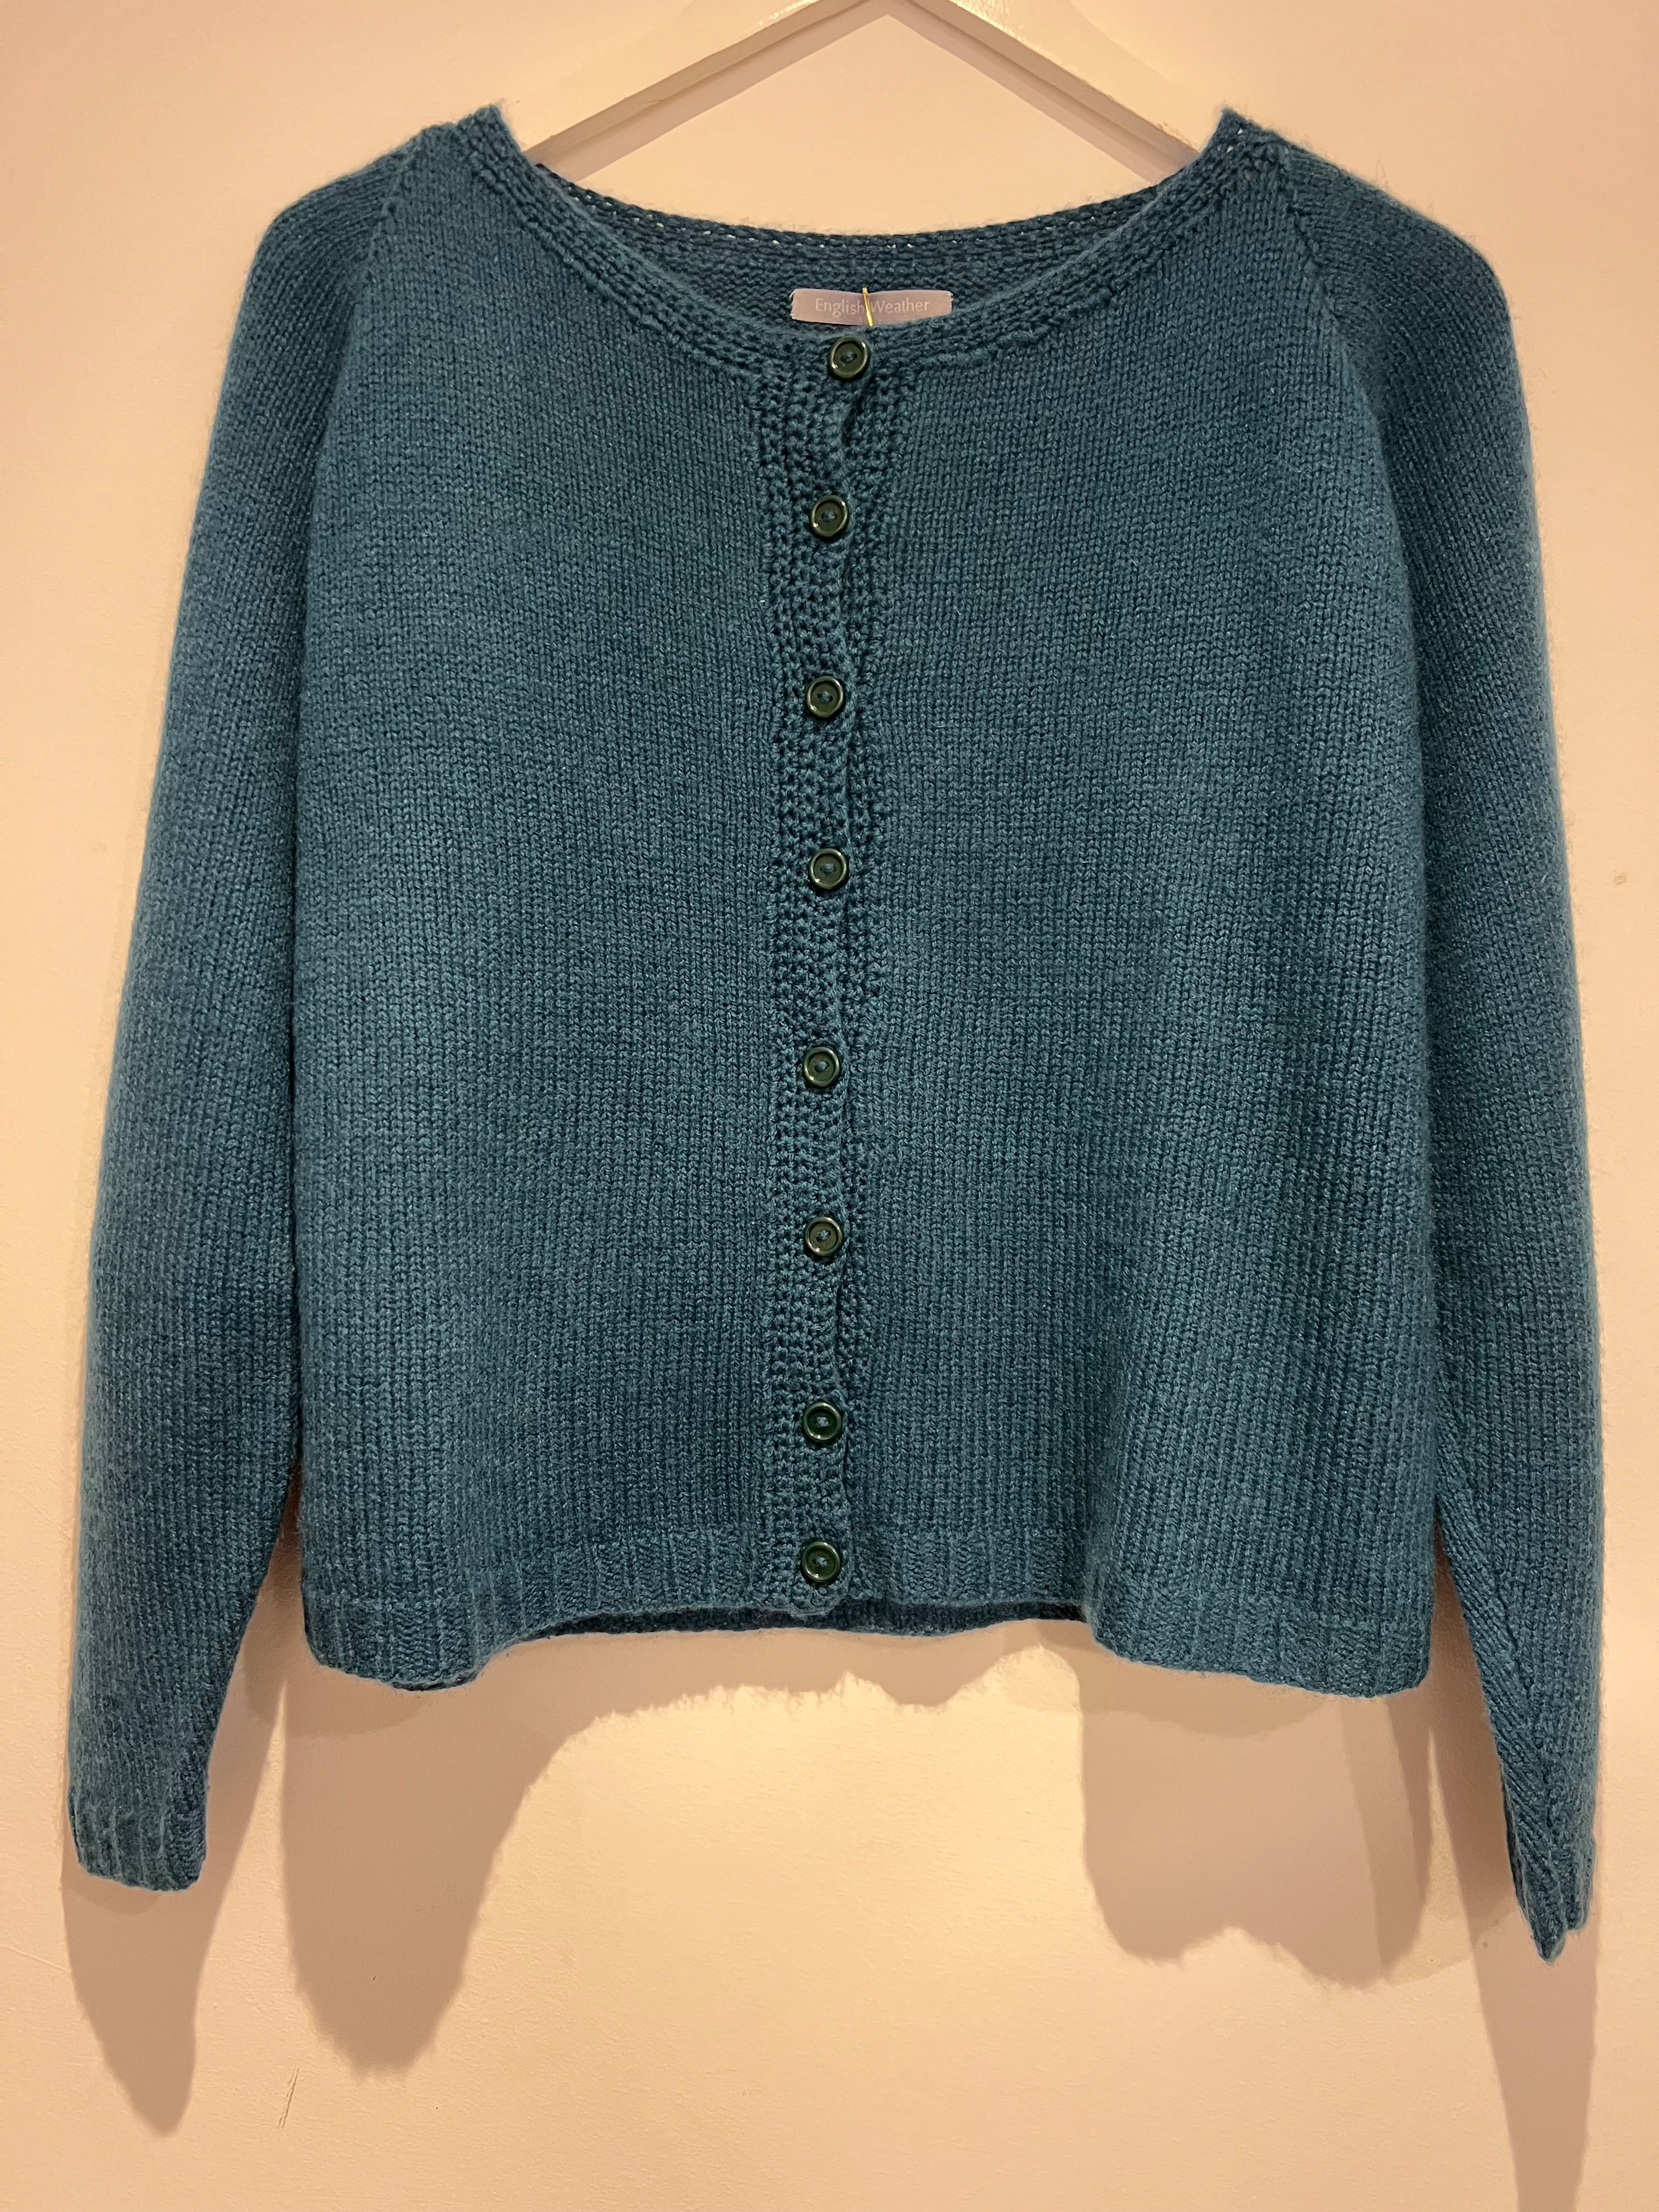 Hetre Alresford Hampshire Clothes Store English Weather Teal Cashmere Cardigan